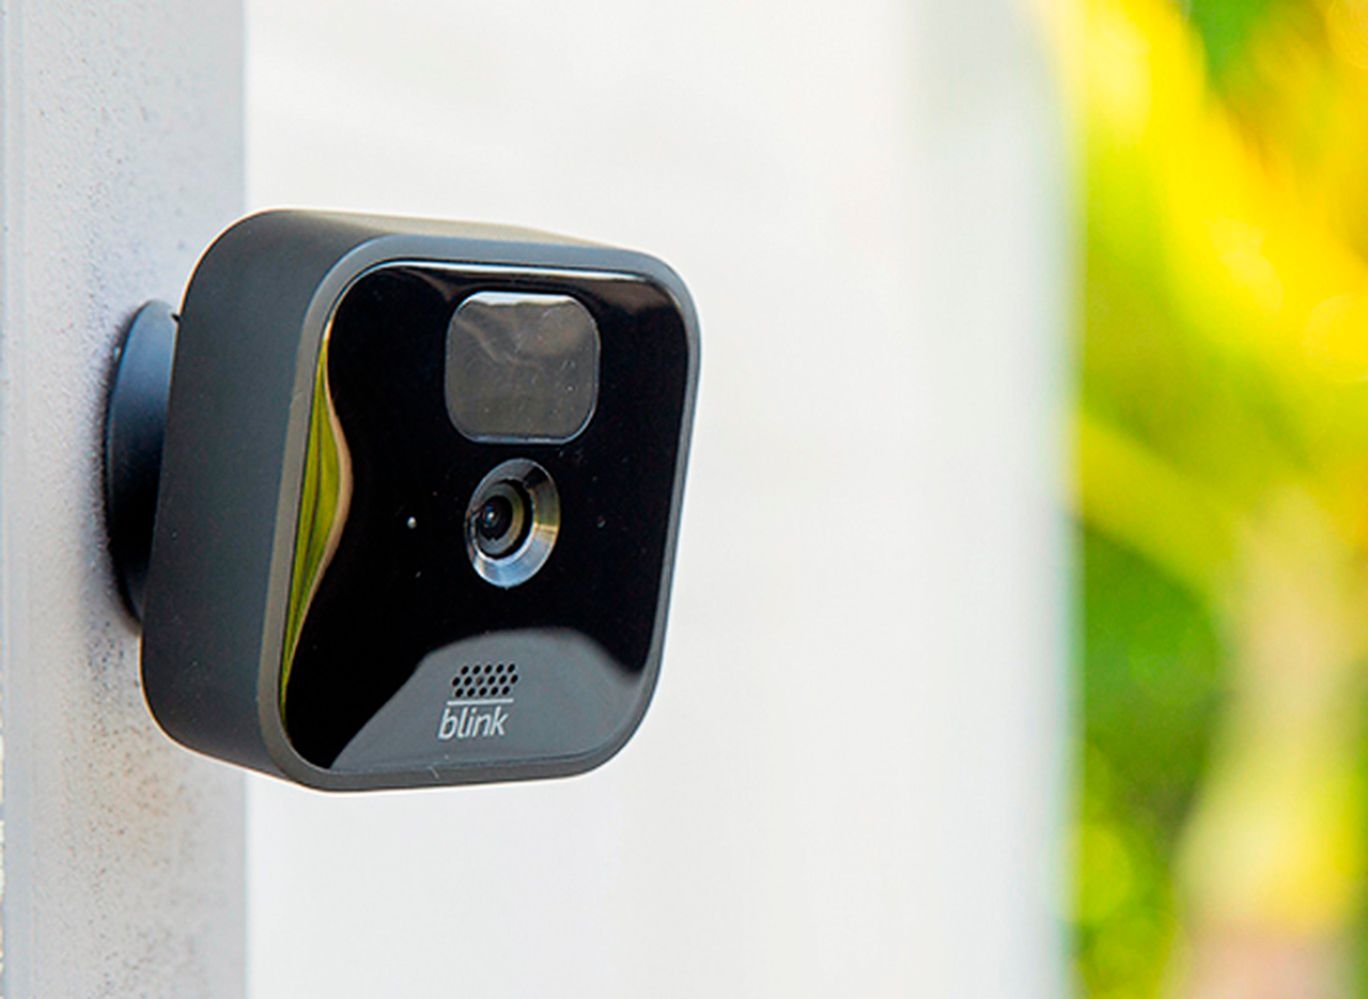 Take $100 Off a Pair of Blink Outdoor Security Cameras With This 1-Day Deal  at Best Buy - CNET